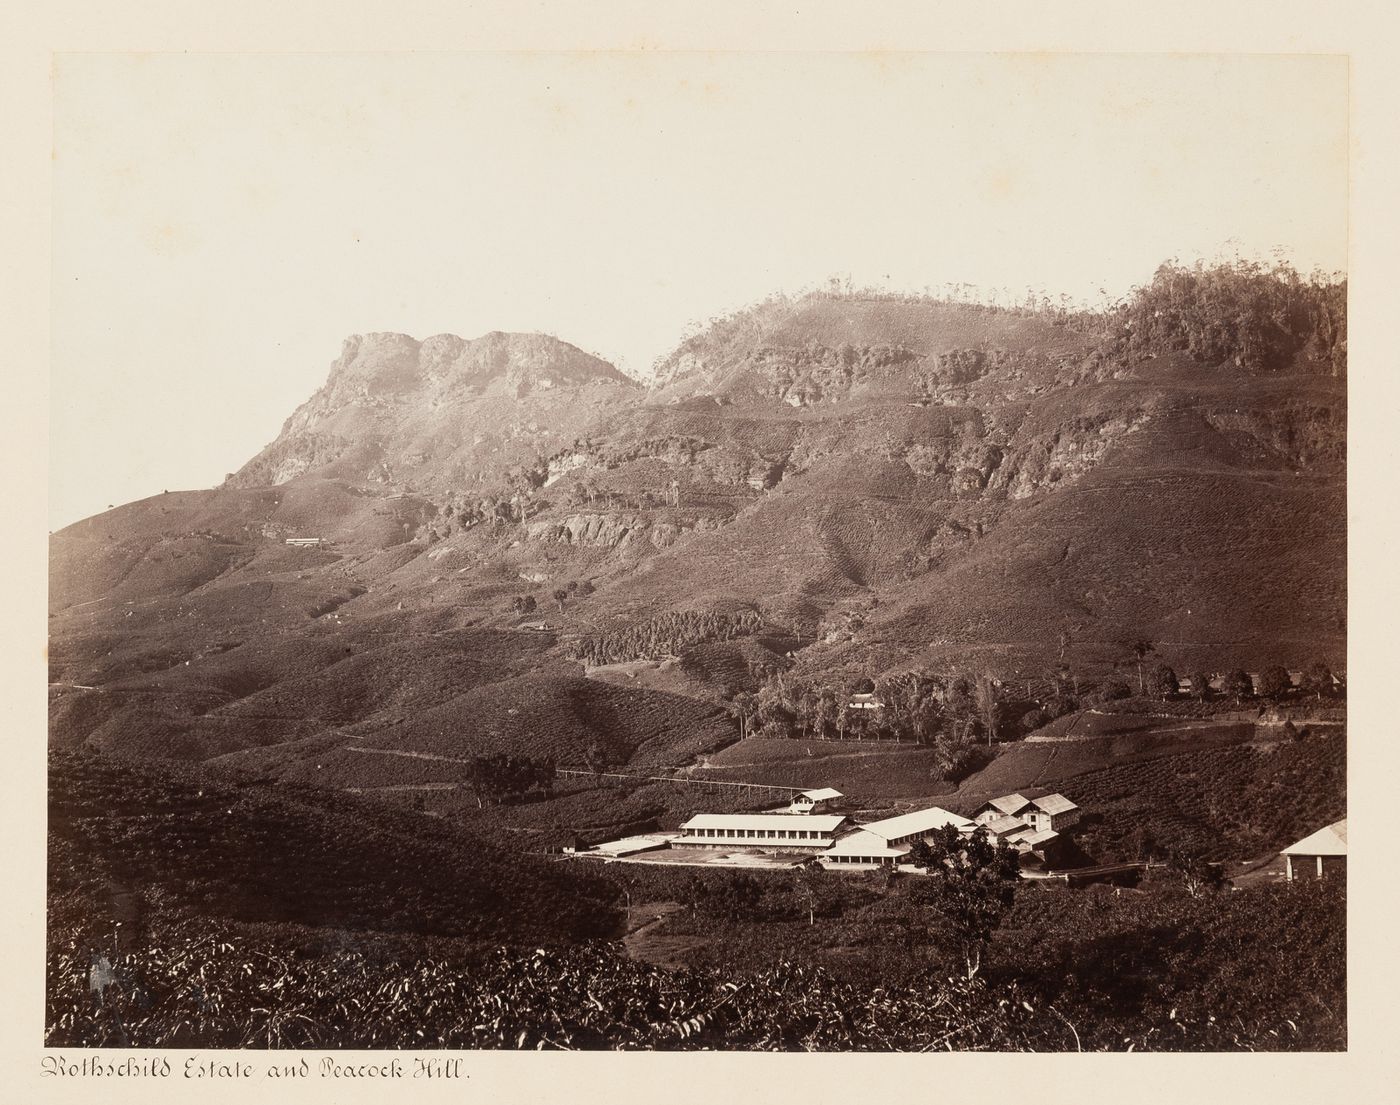 View of the Rothschild Estate and Peacock Hill, Ceylon (now Sri Lanka)